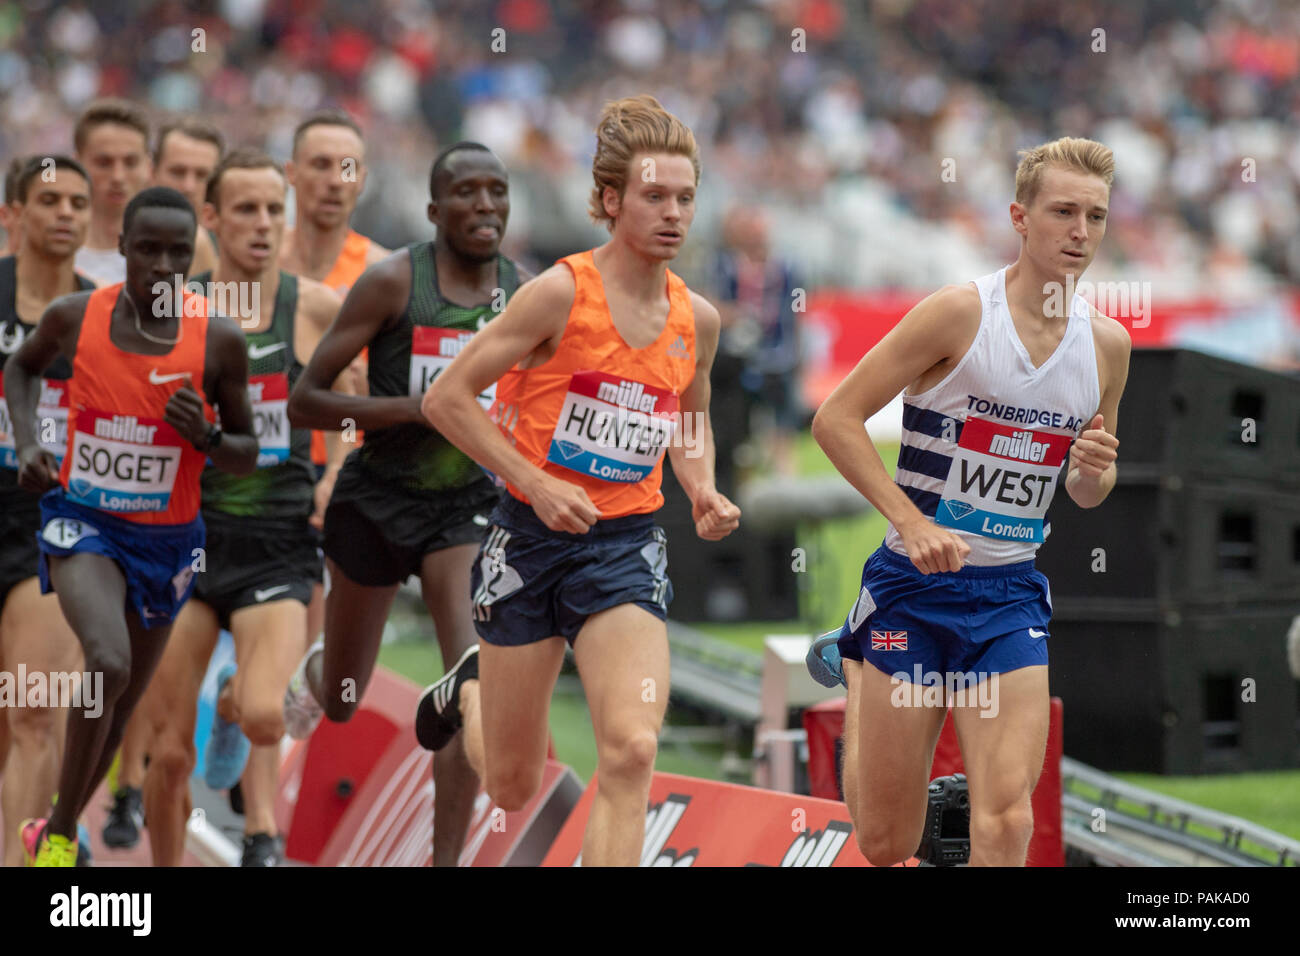 London, UK. 22nd July 2018. James West (GBR) leads Andrew Hunter (USA) in the 1500m at the Muller Anniversary Games at the London Stadium, London, Great Britiain, on 22 July 2018. Credit: Andrew Peat/Alamy Live News Stock Photo